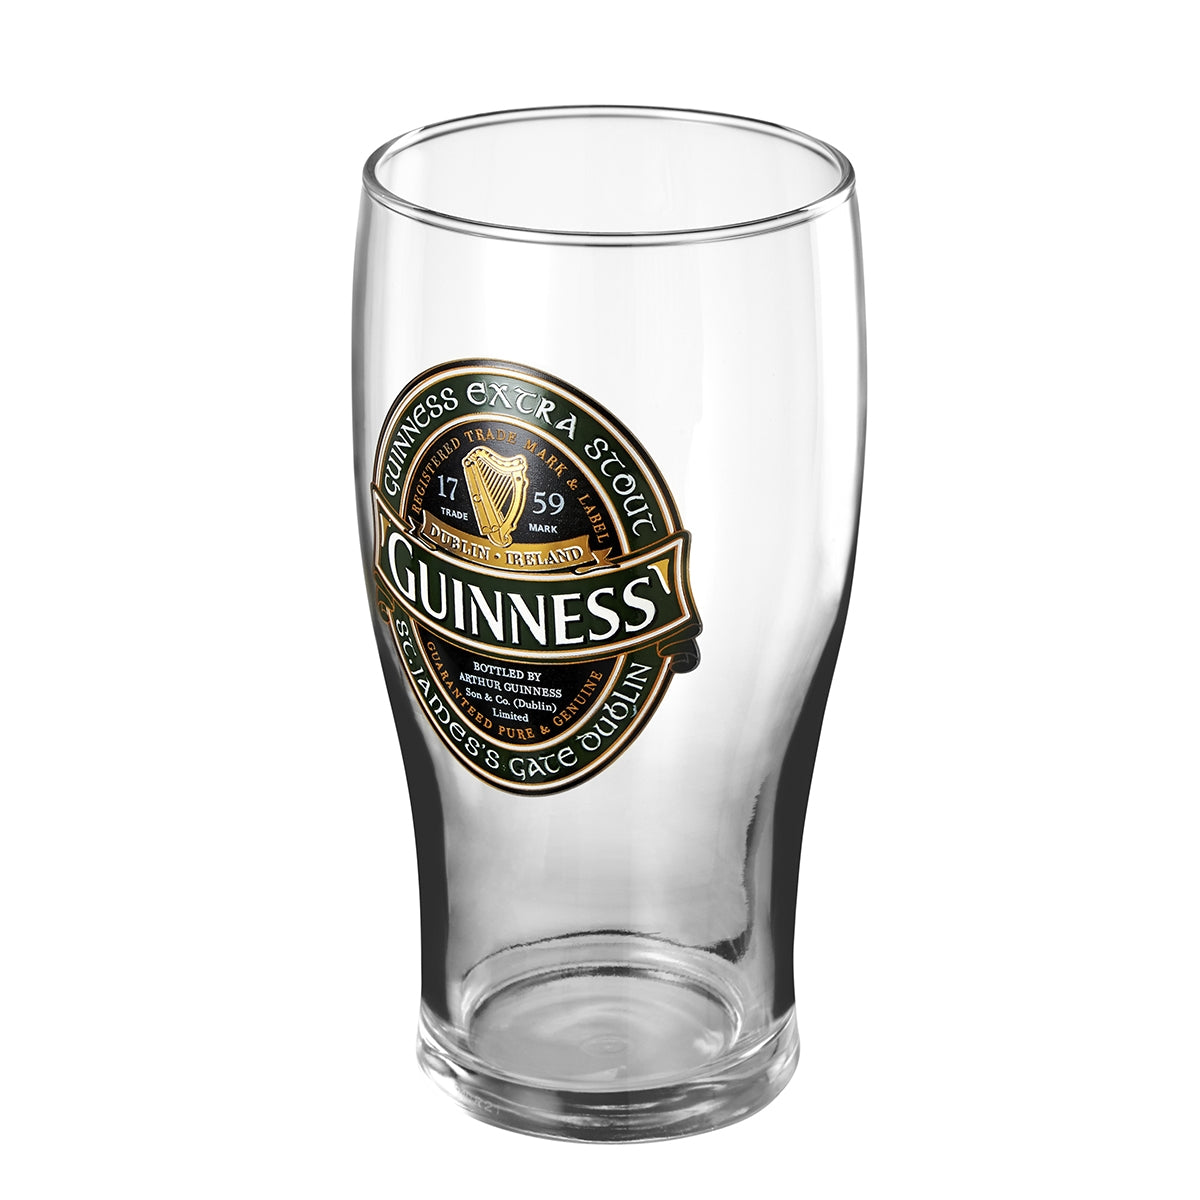 Guinness Ireland Collection Pint Glass Twin Pack Guinness Extra Stout Label pint glass.